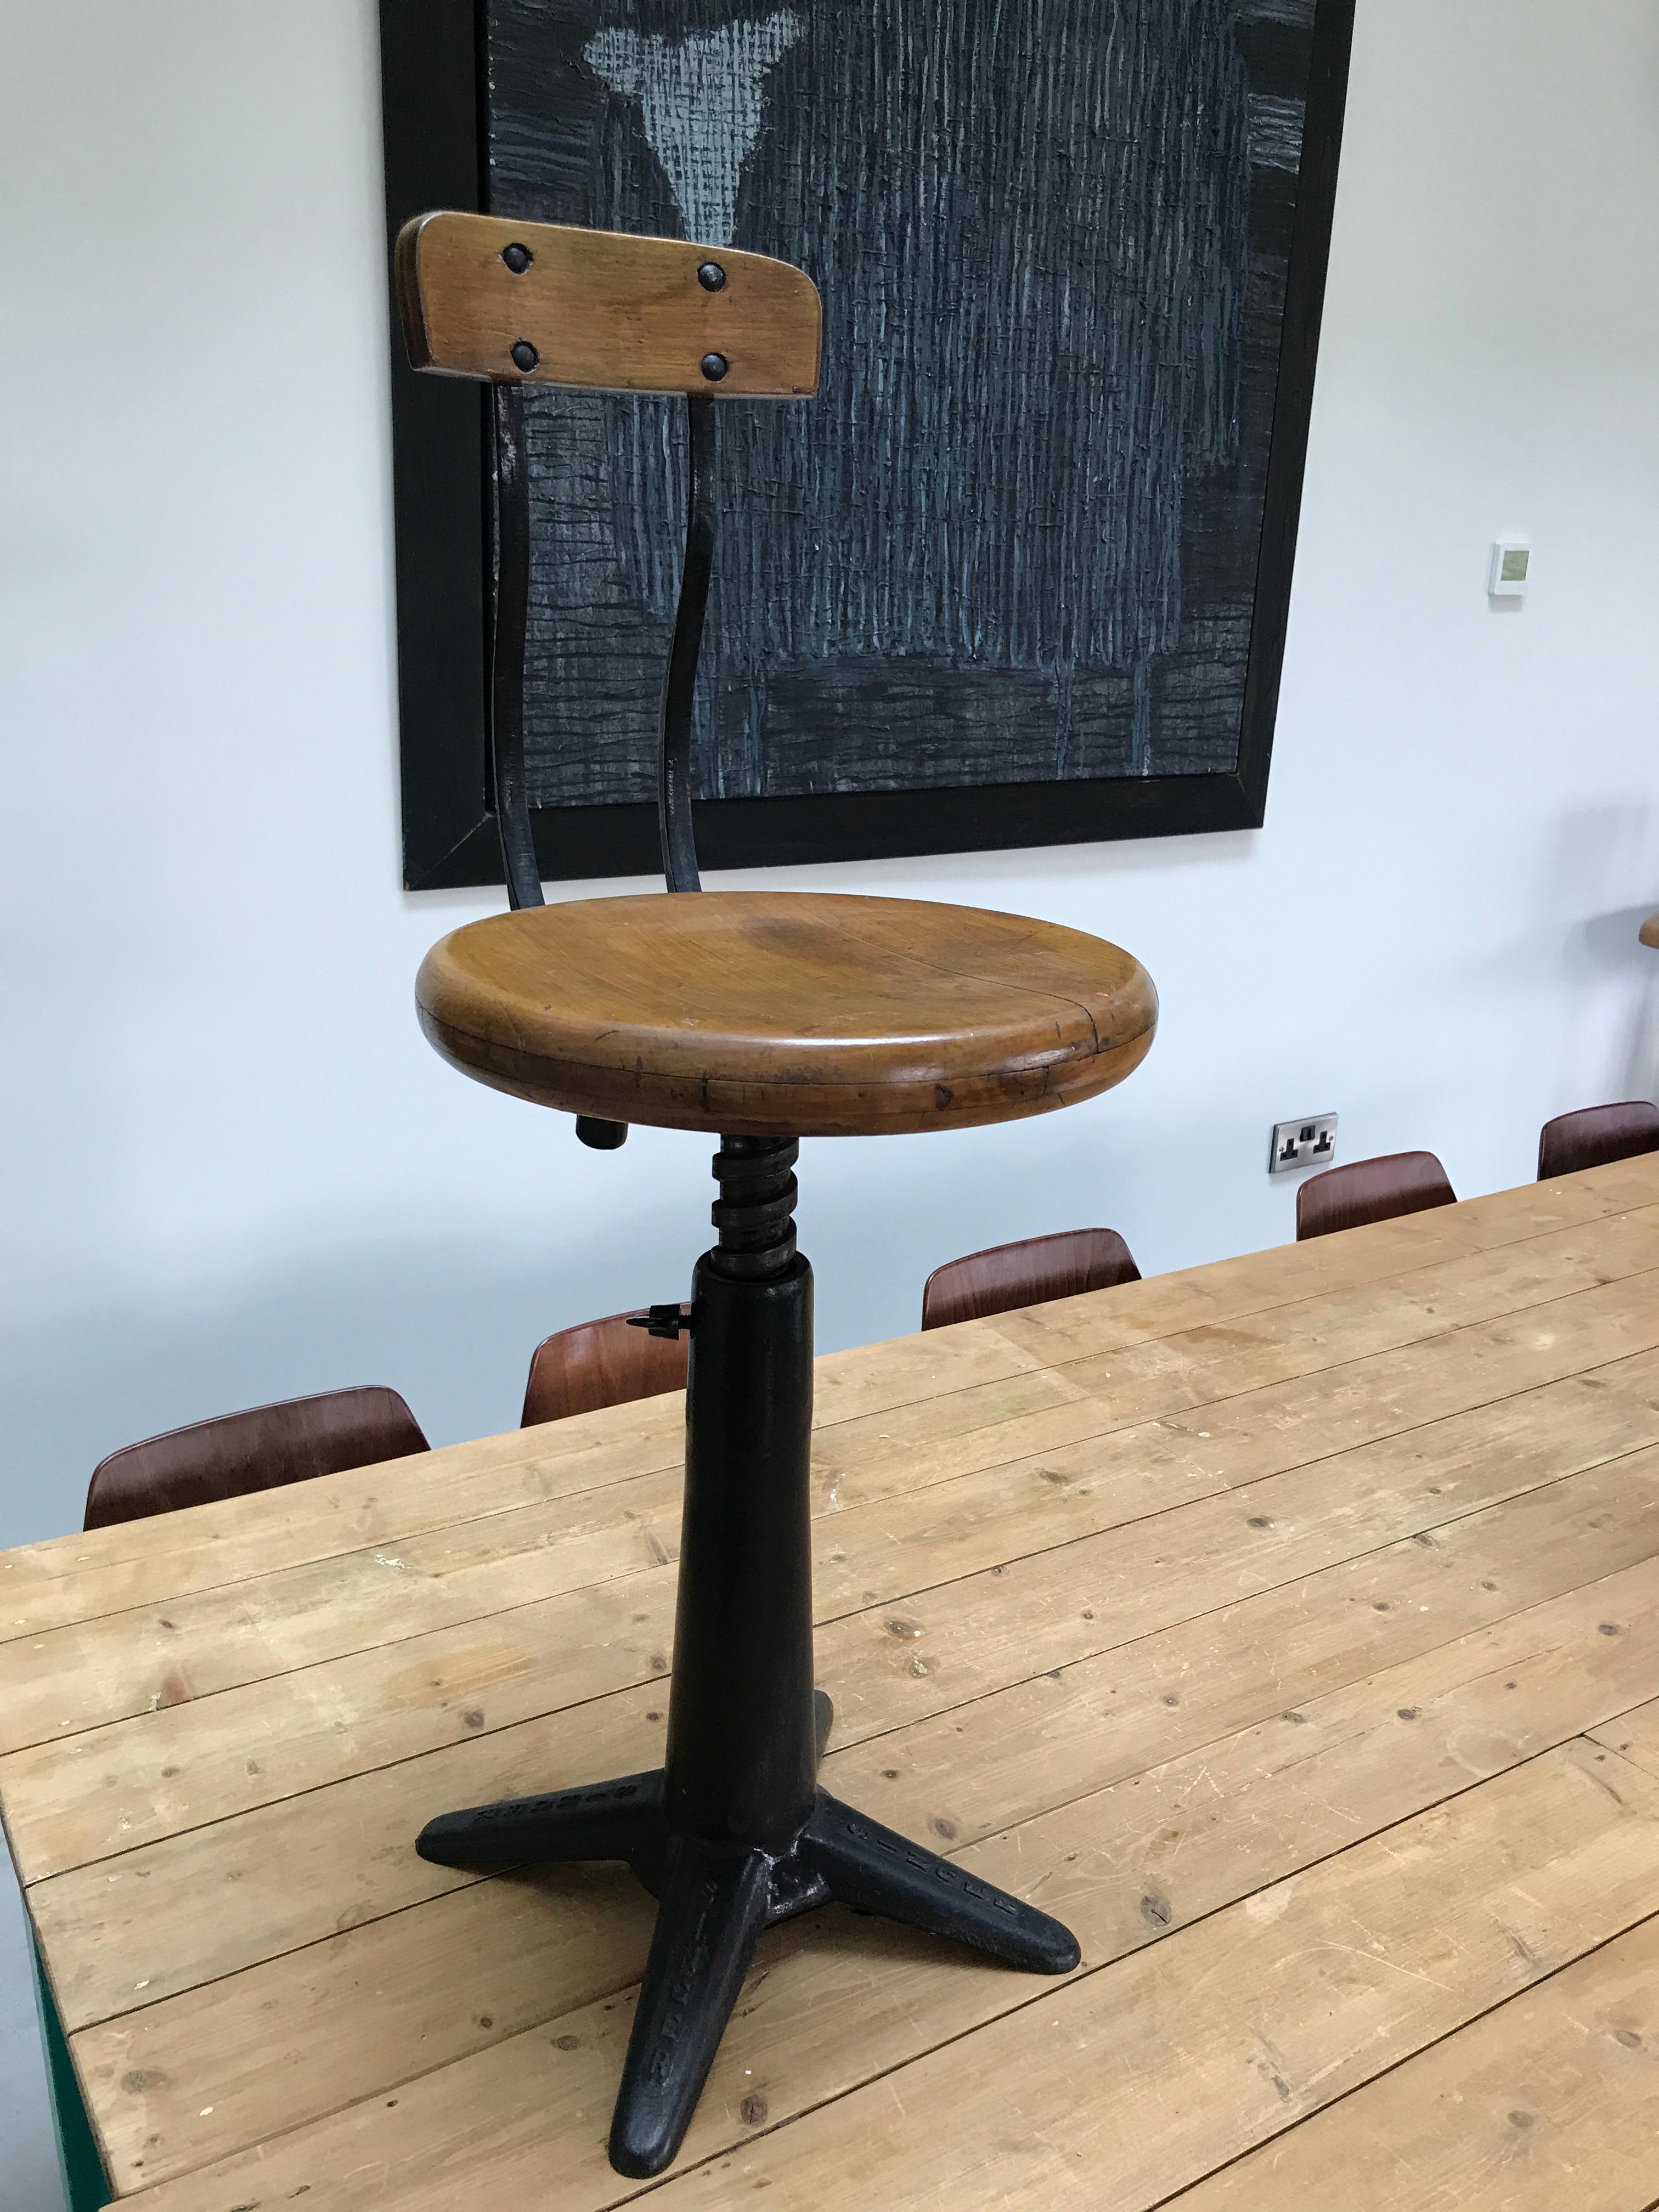 Exceptional quality cast iron singer industrial stool with backrest original condition

Fully height adjustable, seat between 45 and 64cm (18-25.5 inch) the backrest is sprung by two springs

Measurements are seat height between 45-64cm,